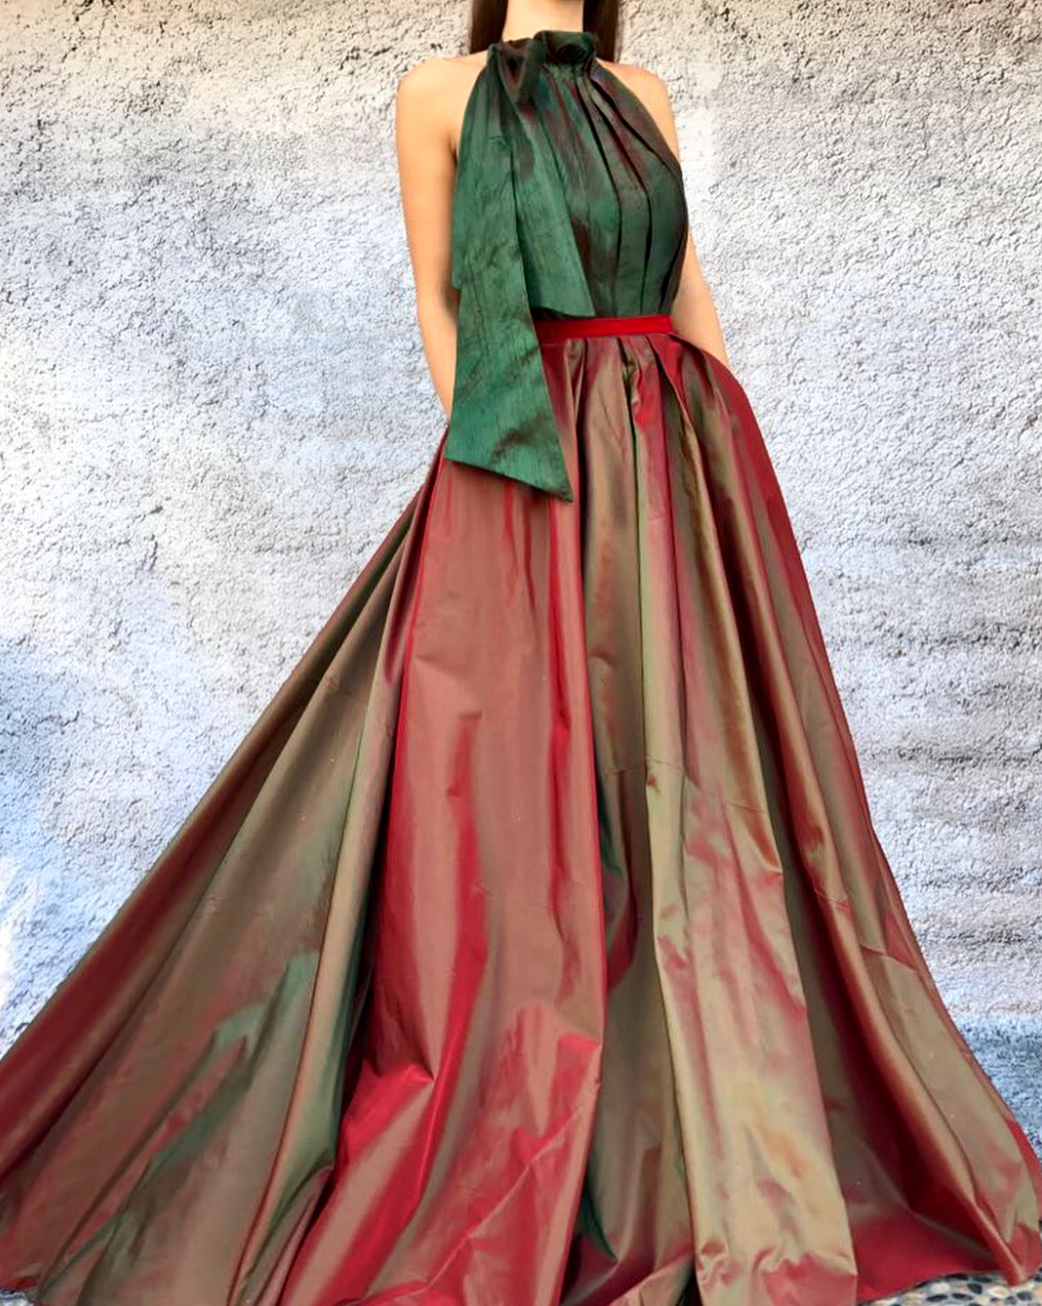 Green and red A-Line dress with no sleeves